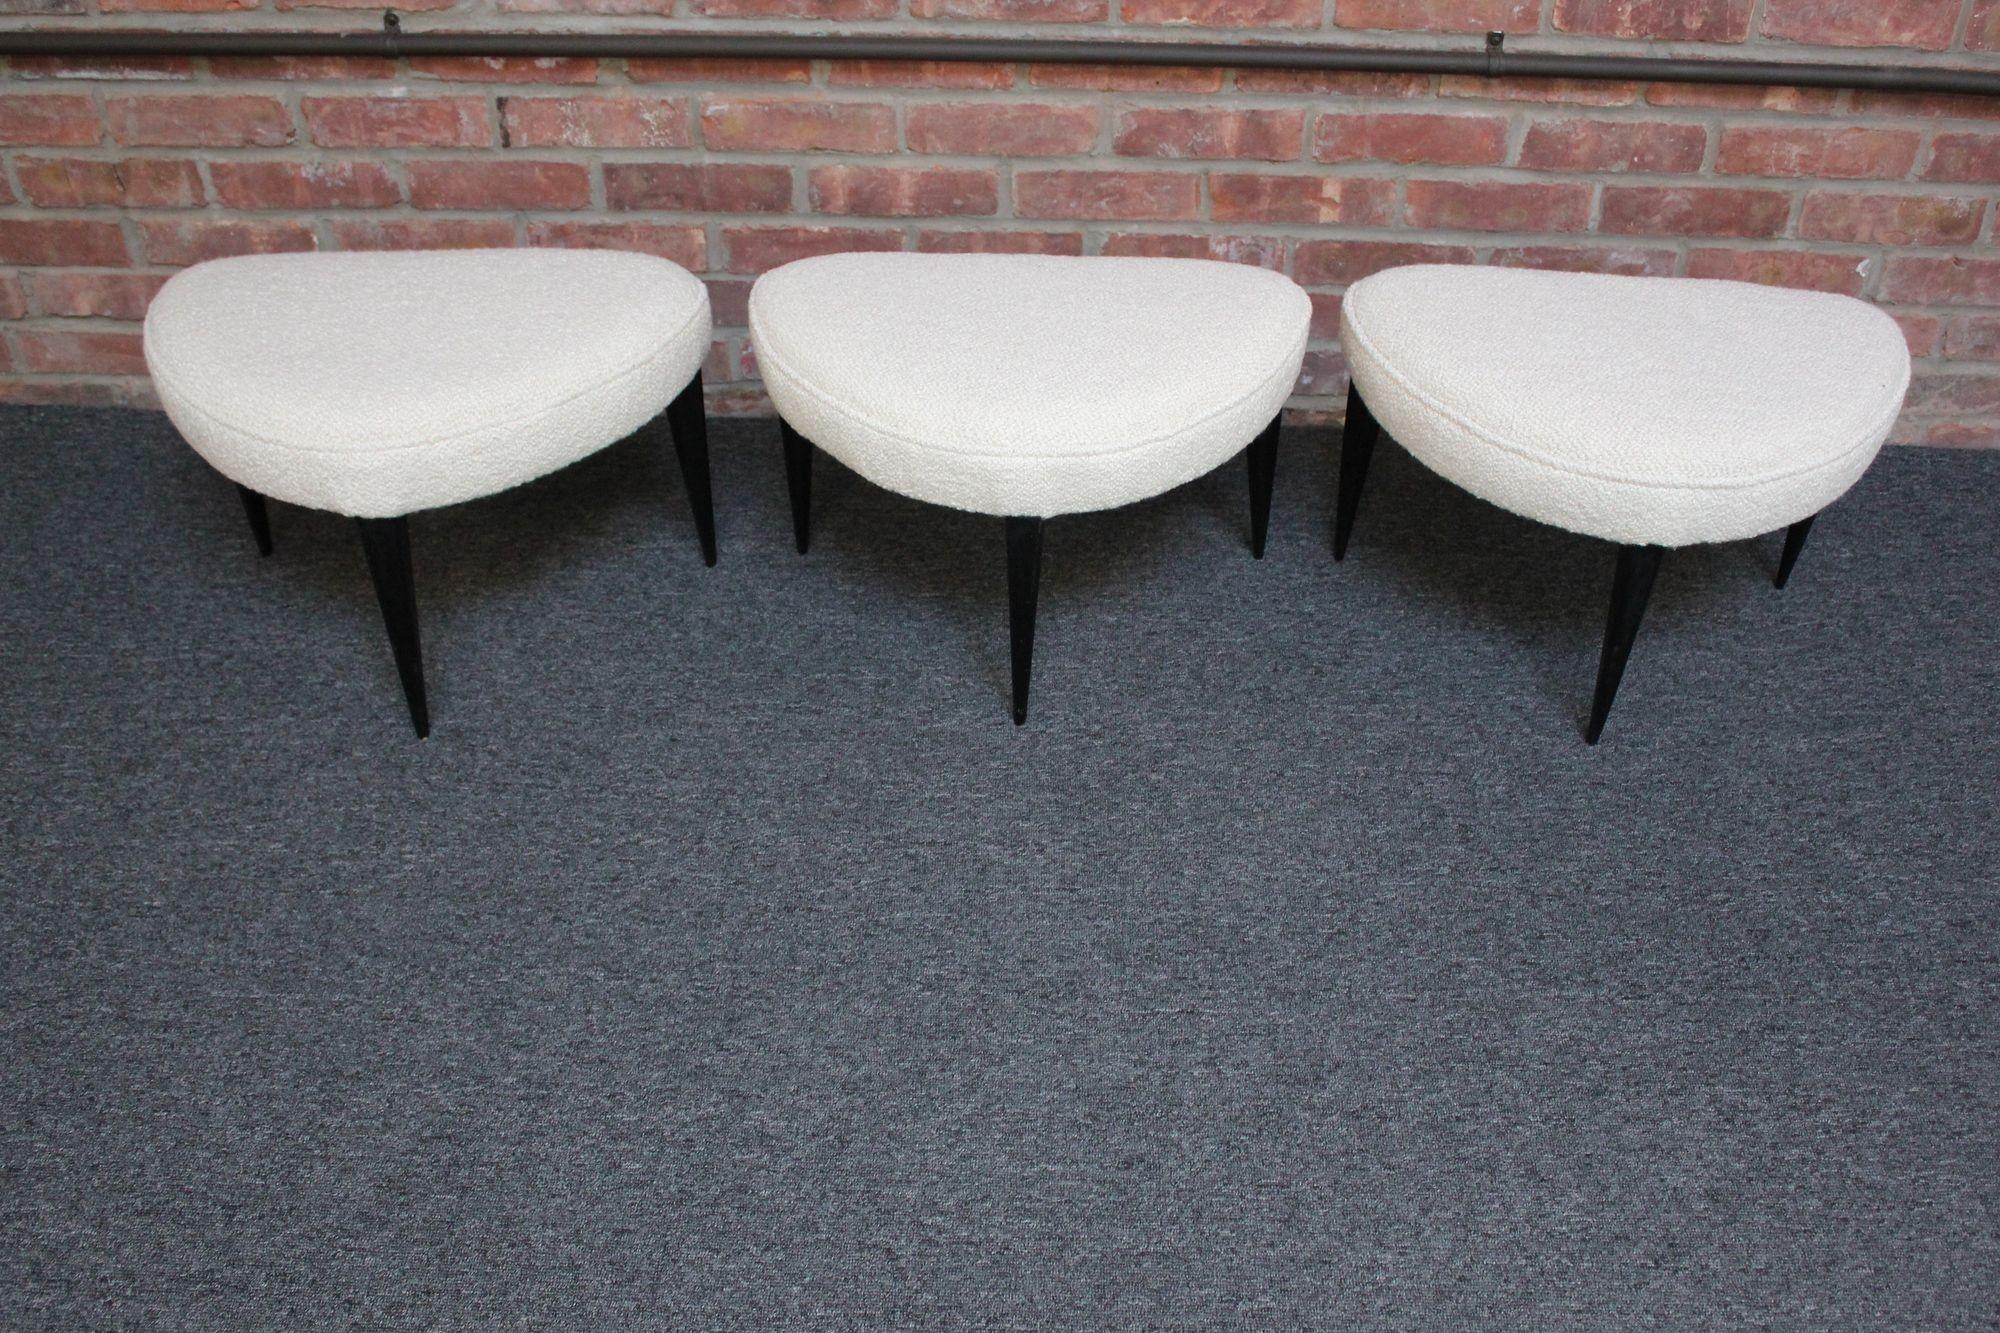 Set of three, half moon-form footstools/ottomans sourced in Rome, Italy newly upholstered in a cream bouclé (circa 1950s, Italy).
Sculpted ebonized legs (three per stool) boast sharp, dramatic lines, and the original black lacquer contrasts nicely